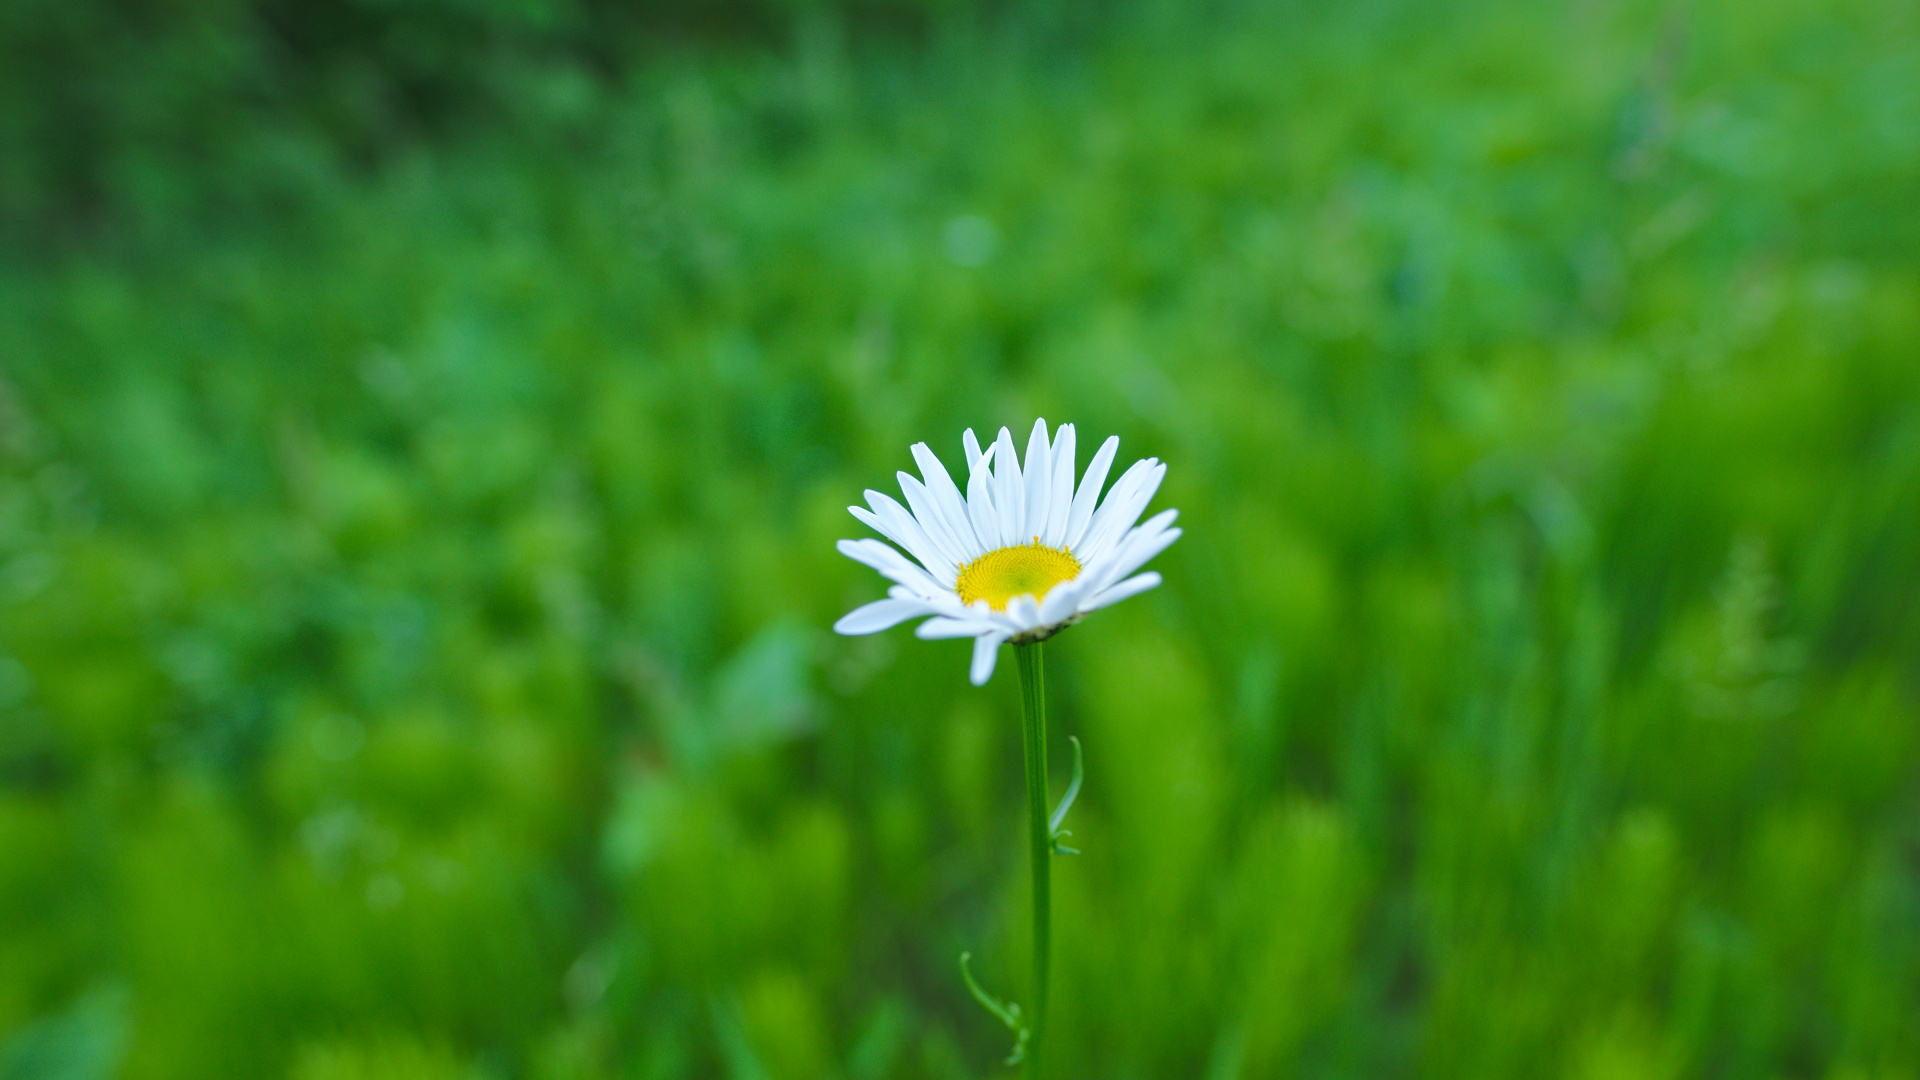 White Daisy in Bloom During Daytime. Wallpaper in 1920x1080 Resolution